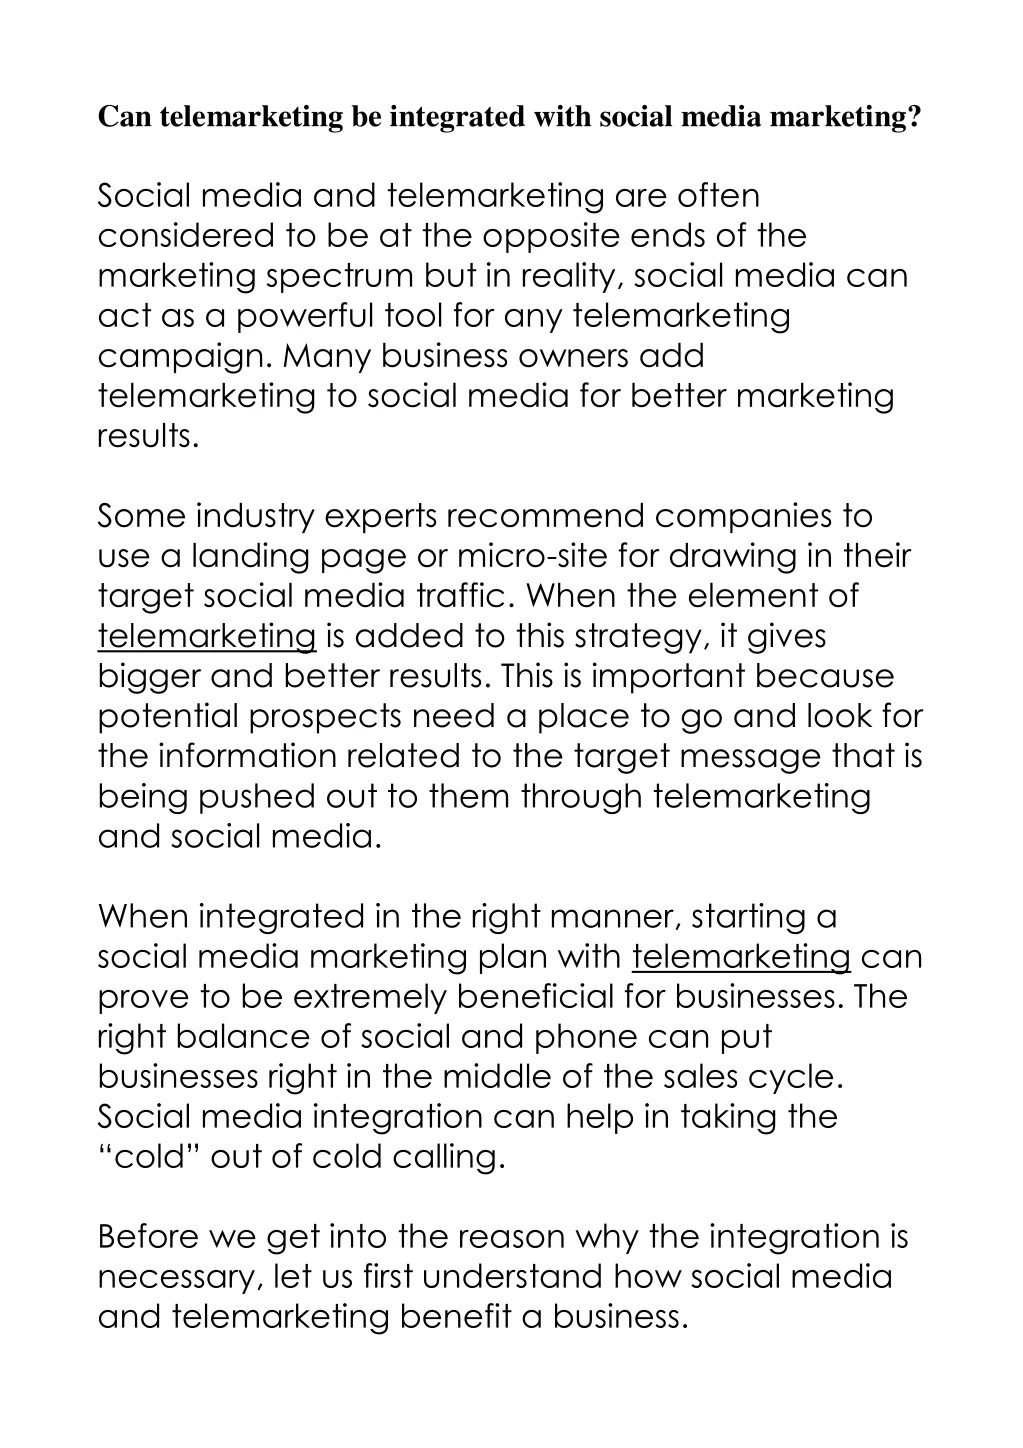 can telemarketing be integrated with social media